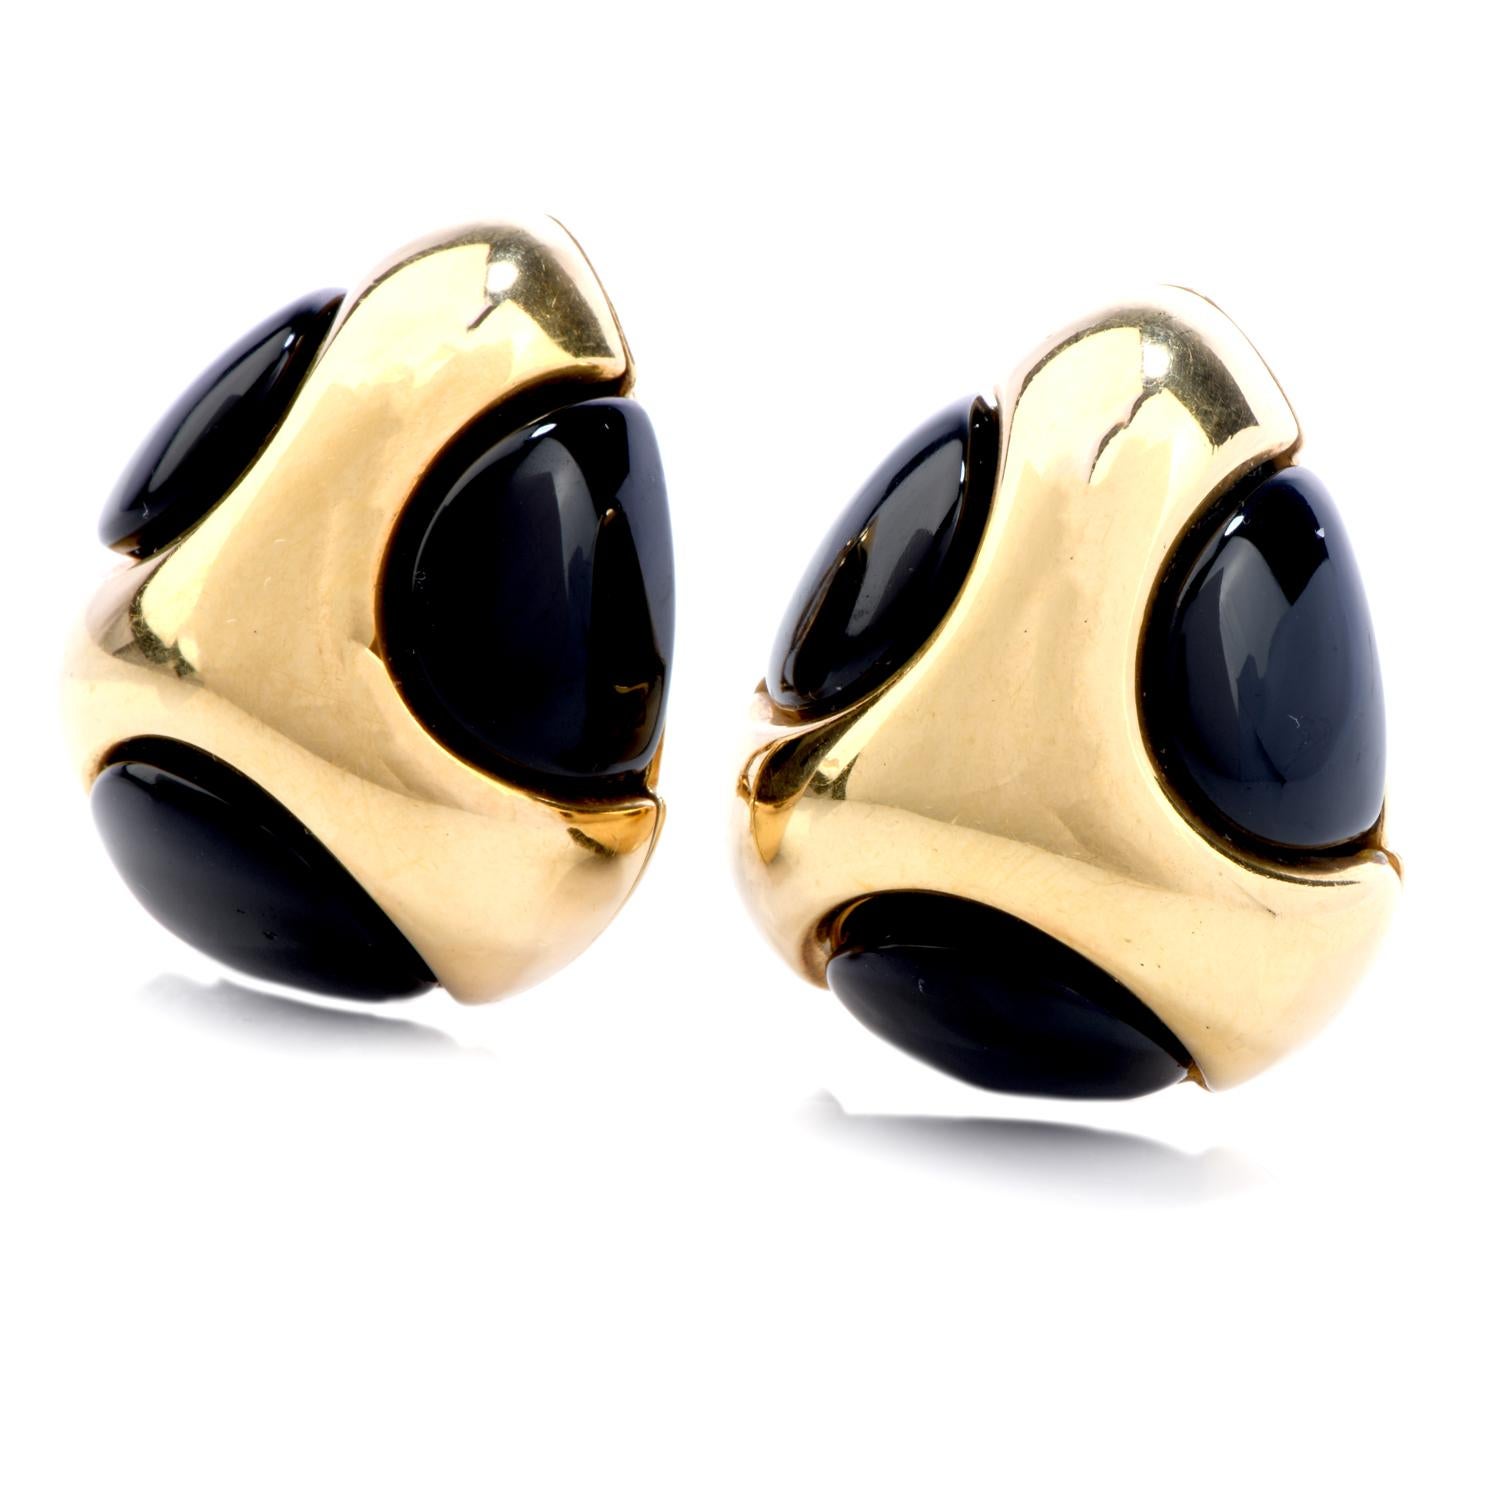 Wear this chic and fashionable Vintage 1970s Black Jade  18K Gold Polka Dot Tear Drop Clip Earrings the next time you venture into the city! 

These earrings are crafted in quality 18-karat yellow gold.  There are six genuine black Jade circle